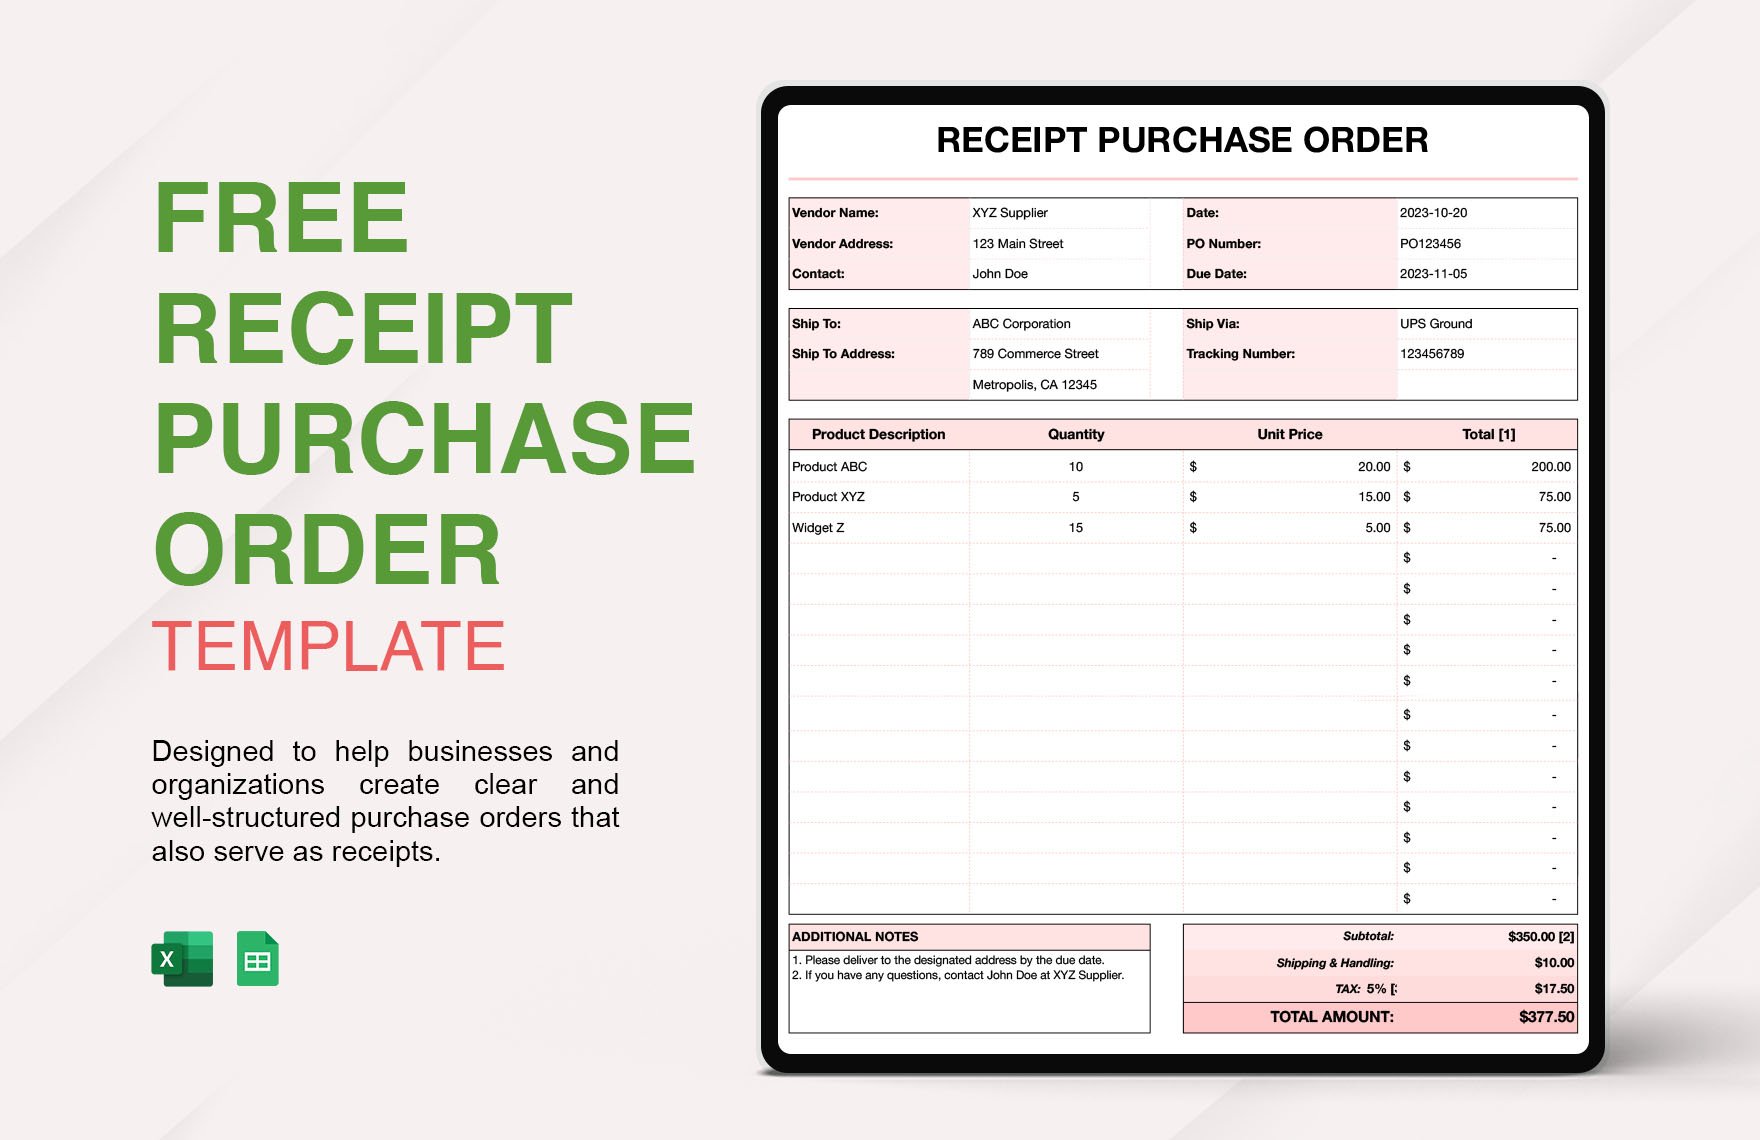 Receipt Purchase Order Template